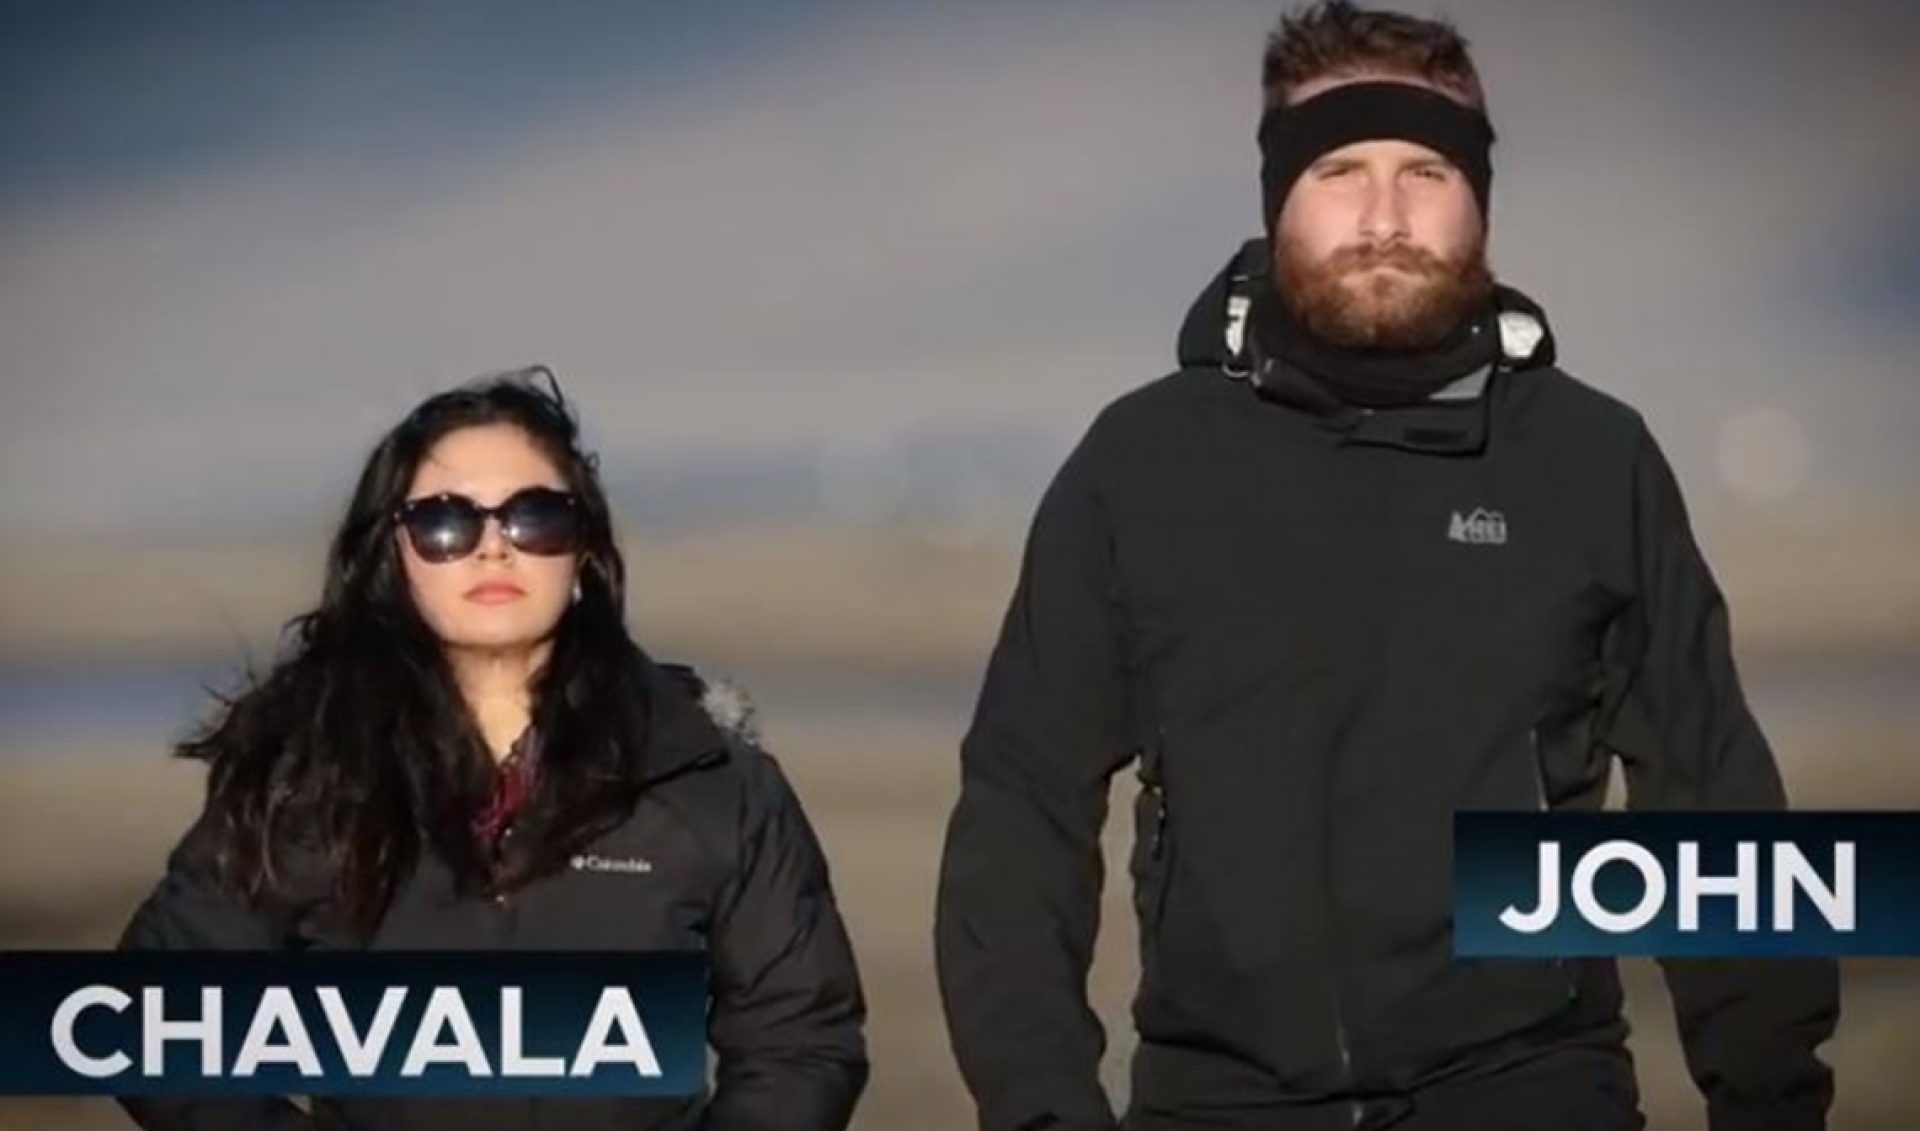 The Young Turks To Explore Climate Change Across The Arctic On Go90 (Trailer)